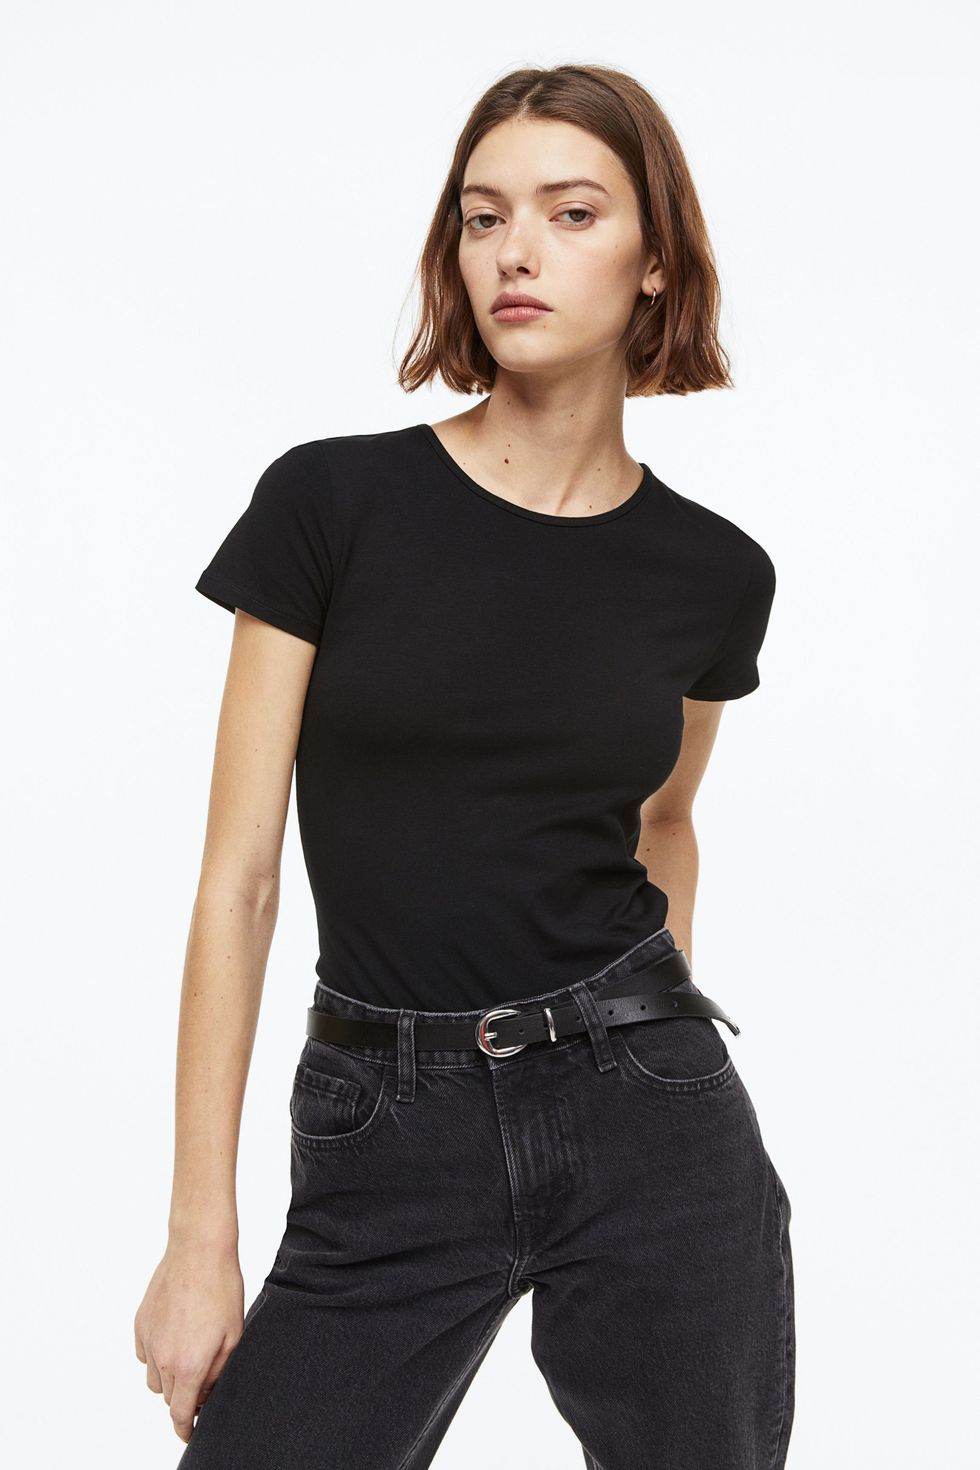 Square-neck form-fitting T-shirt